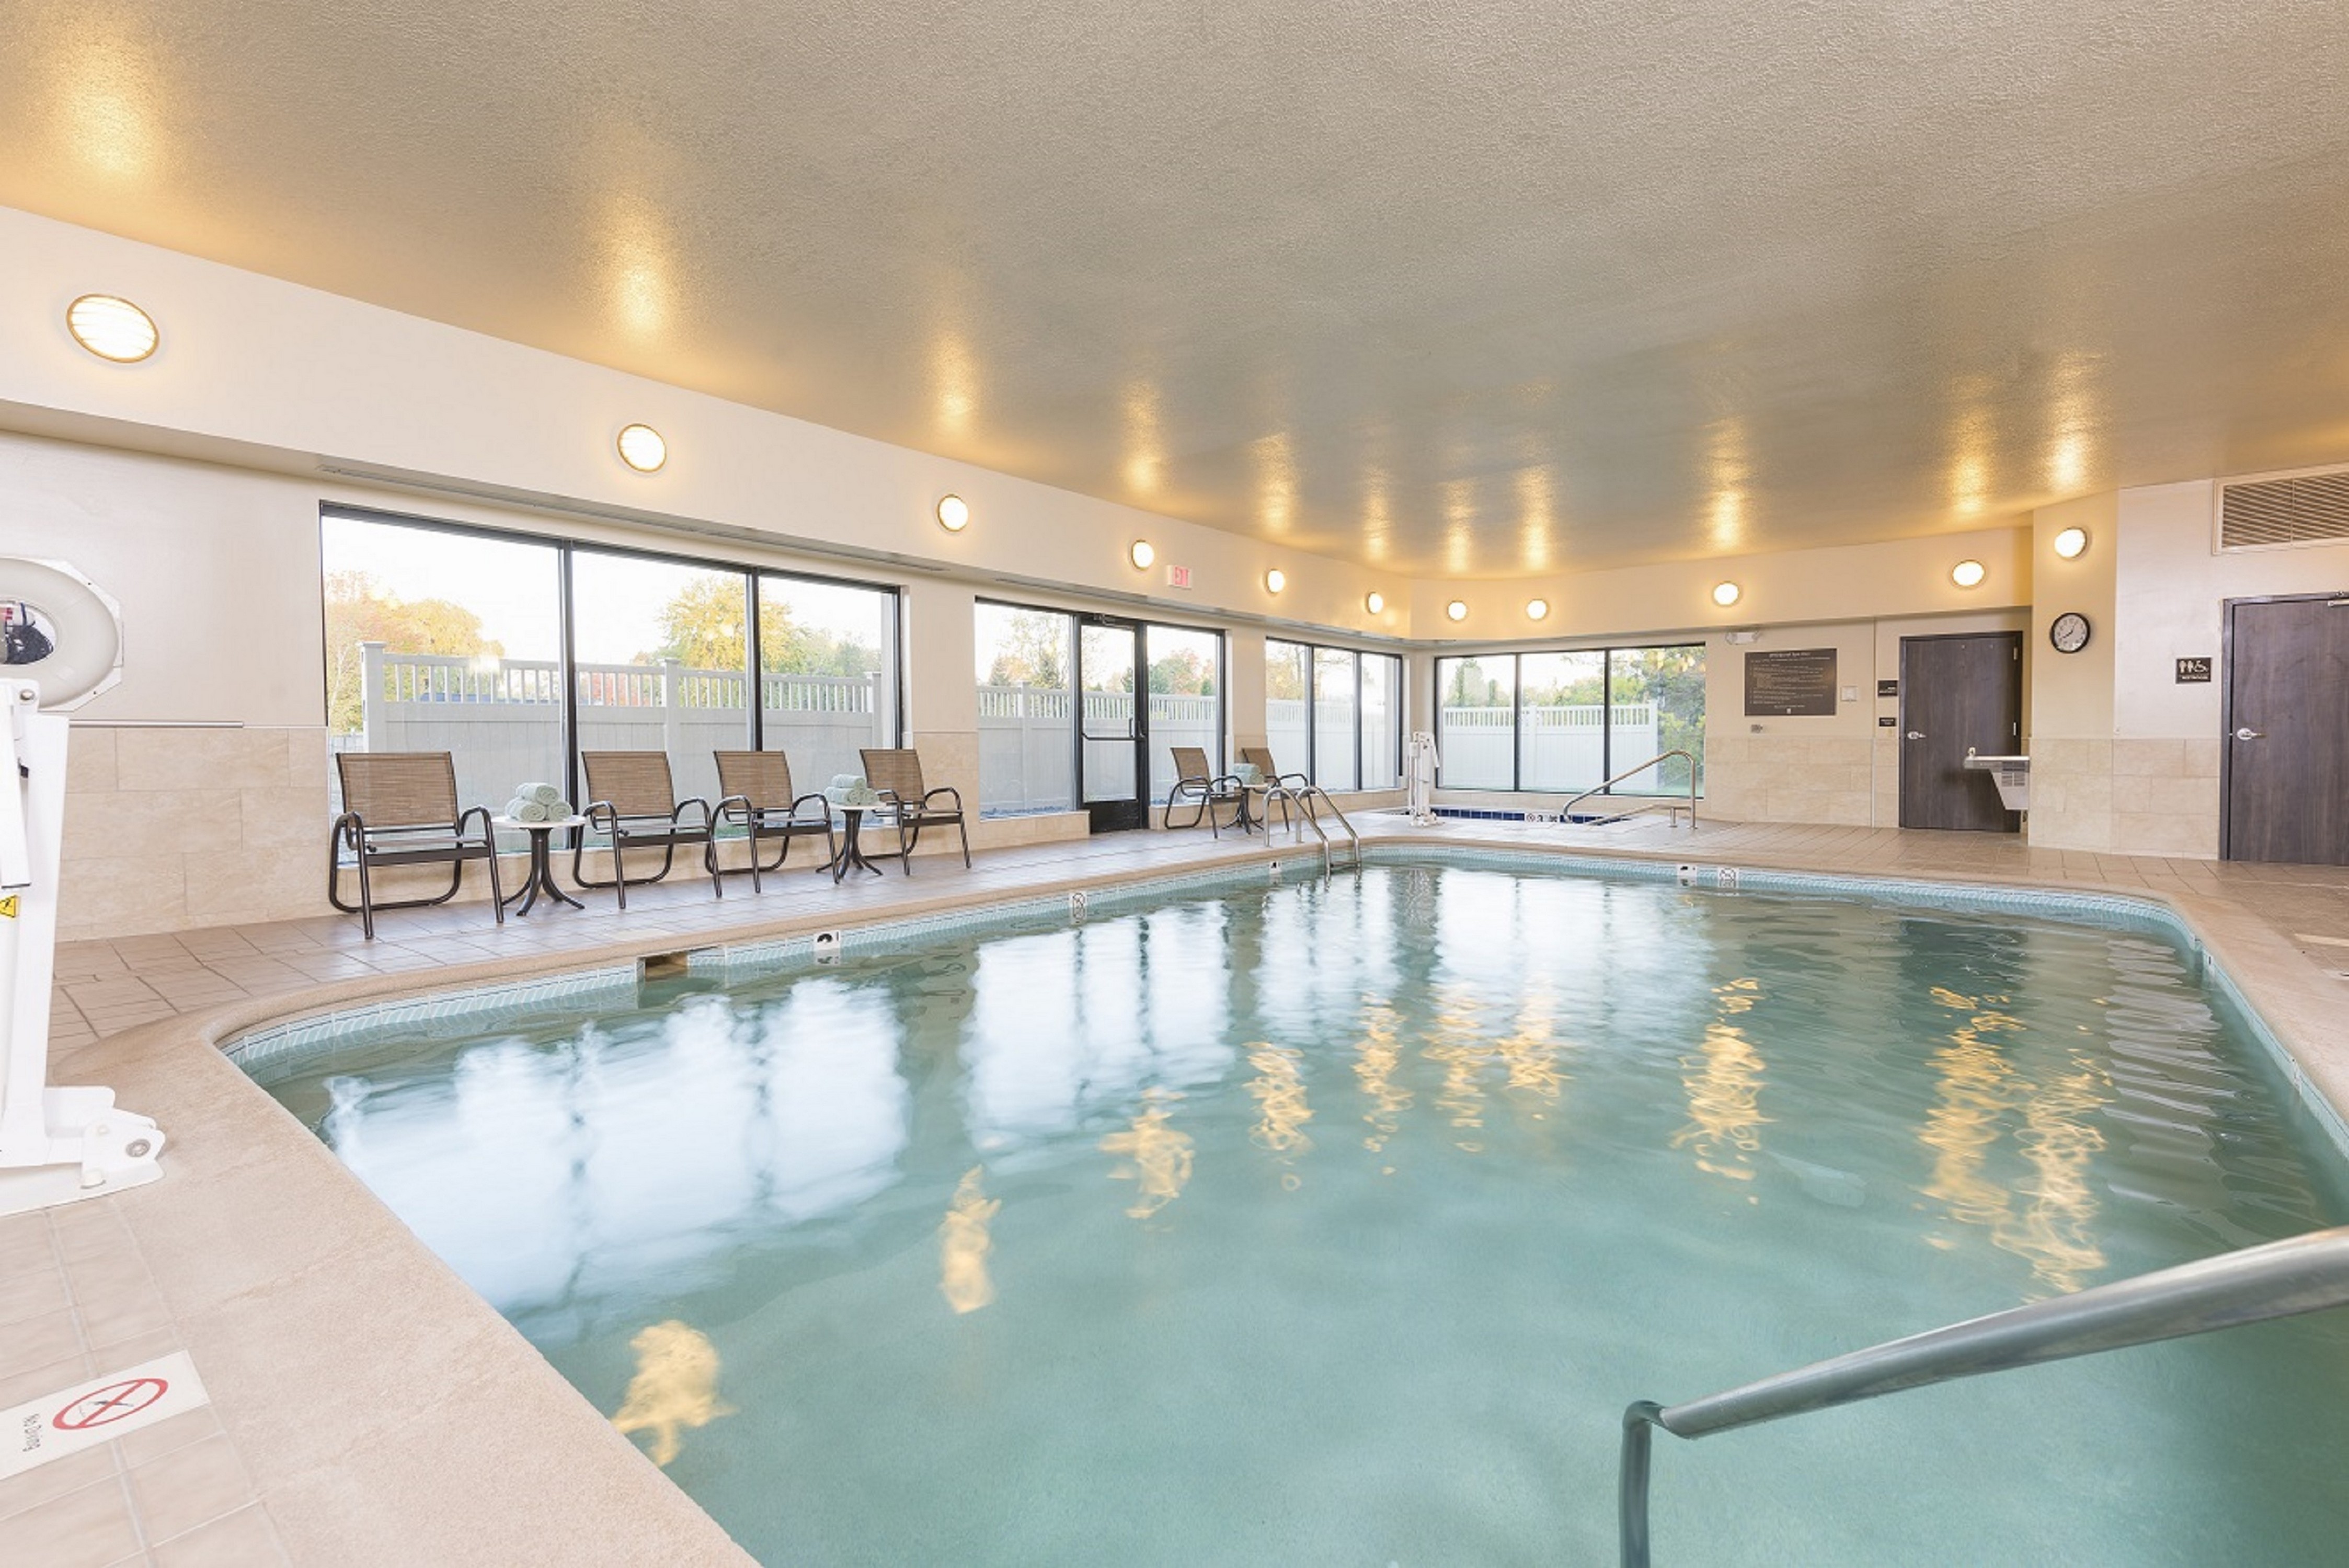 Indoor Swimming Pool with Seats